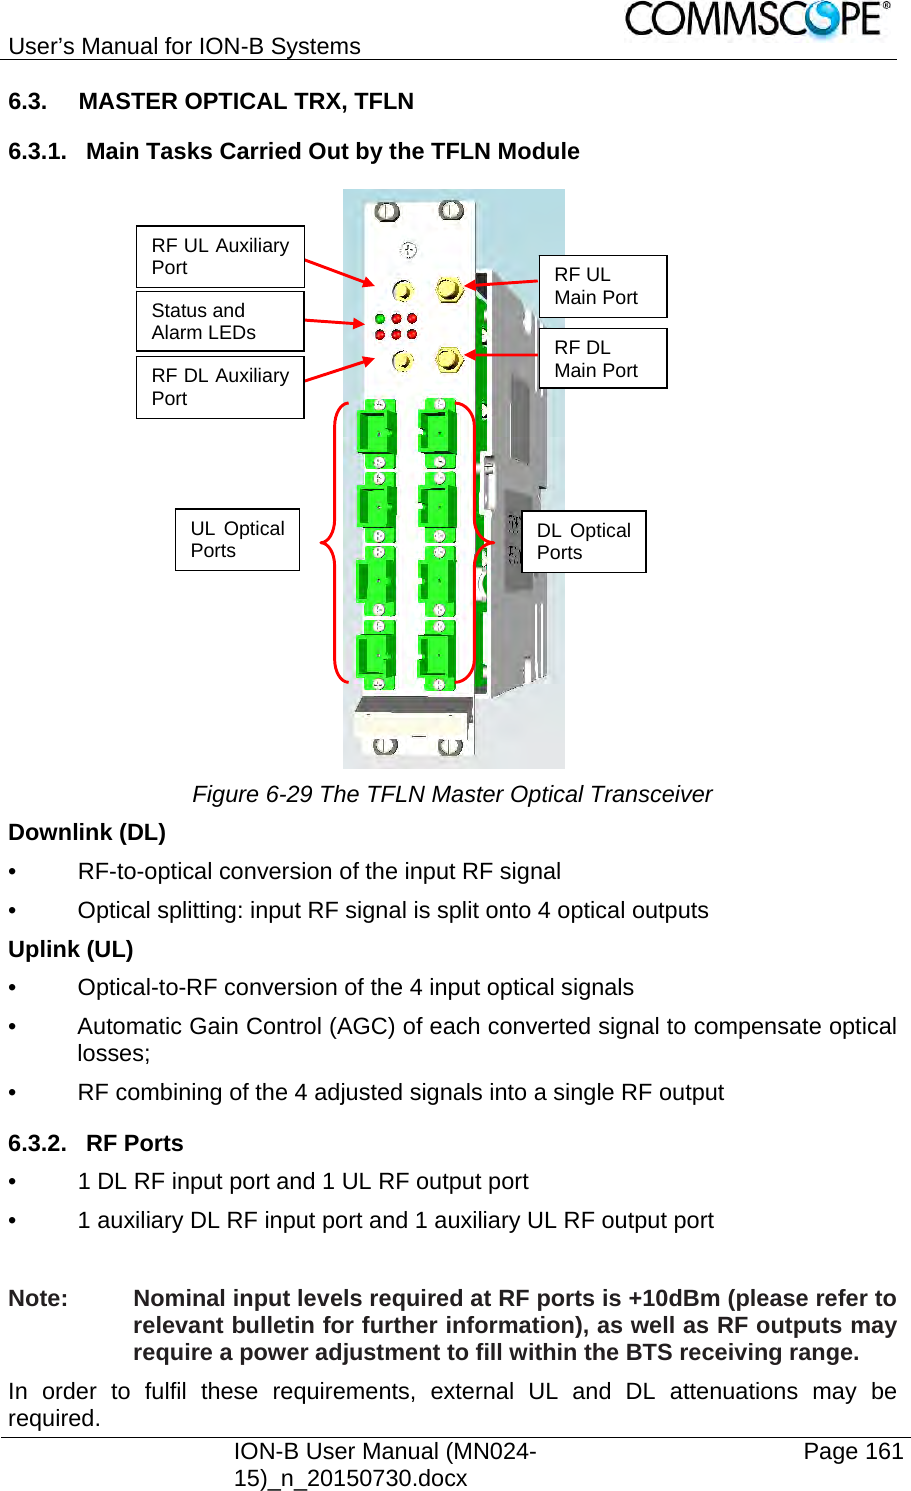 User’s Manual for ION-B Systems    ION-B User Manual (MN024-15)_n_20150730.docx  Page 161 6.3.  MASTER OPTICAL TRX, TFLN 6.3.1.  Main Tasks Carried Out by the TFLN Module   Figure 6-29 The TFLN Master Optical Transceiver Downlink (DL) •  RF-to-optical conversion of the input RF signal •  Optical splitting: input RF signal is split onto 4 optical outputs Uplink (UL) •  Optical-to-RF conversion of the 4 input optical signals •  Automatic Gain Control (AGC) of each converted signal to compensate optical losses; •  RF combining of the 4 adjusted signals into a single RF output 6.3.2. RF Ports •  1 DL RF input port and 1 UL RF output port •  1 auxiliary DL RF input port and 1 auxiliary UL RF output port  Note:  Nominal input levels required at RF ports is +10dBm (please refer to relevant bulletin for further information), as well as RF outputs may require a power adjustment to fill within the BTS receiving range. In order to fulfil these requirements, external UL and DL attenuations may be required. RF UL Auxiliary Port Status and Alarm LEDs RF DL Auxiliary Port UL Optical Ports RF UL Main Port RF DL Main PortDL Optical Ports 